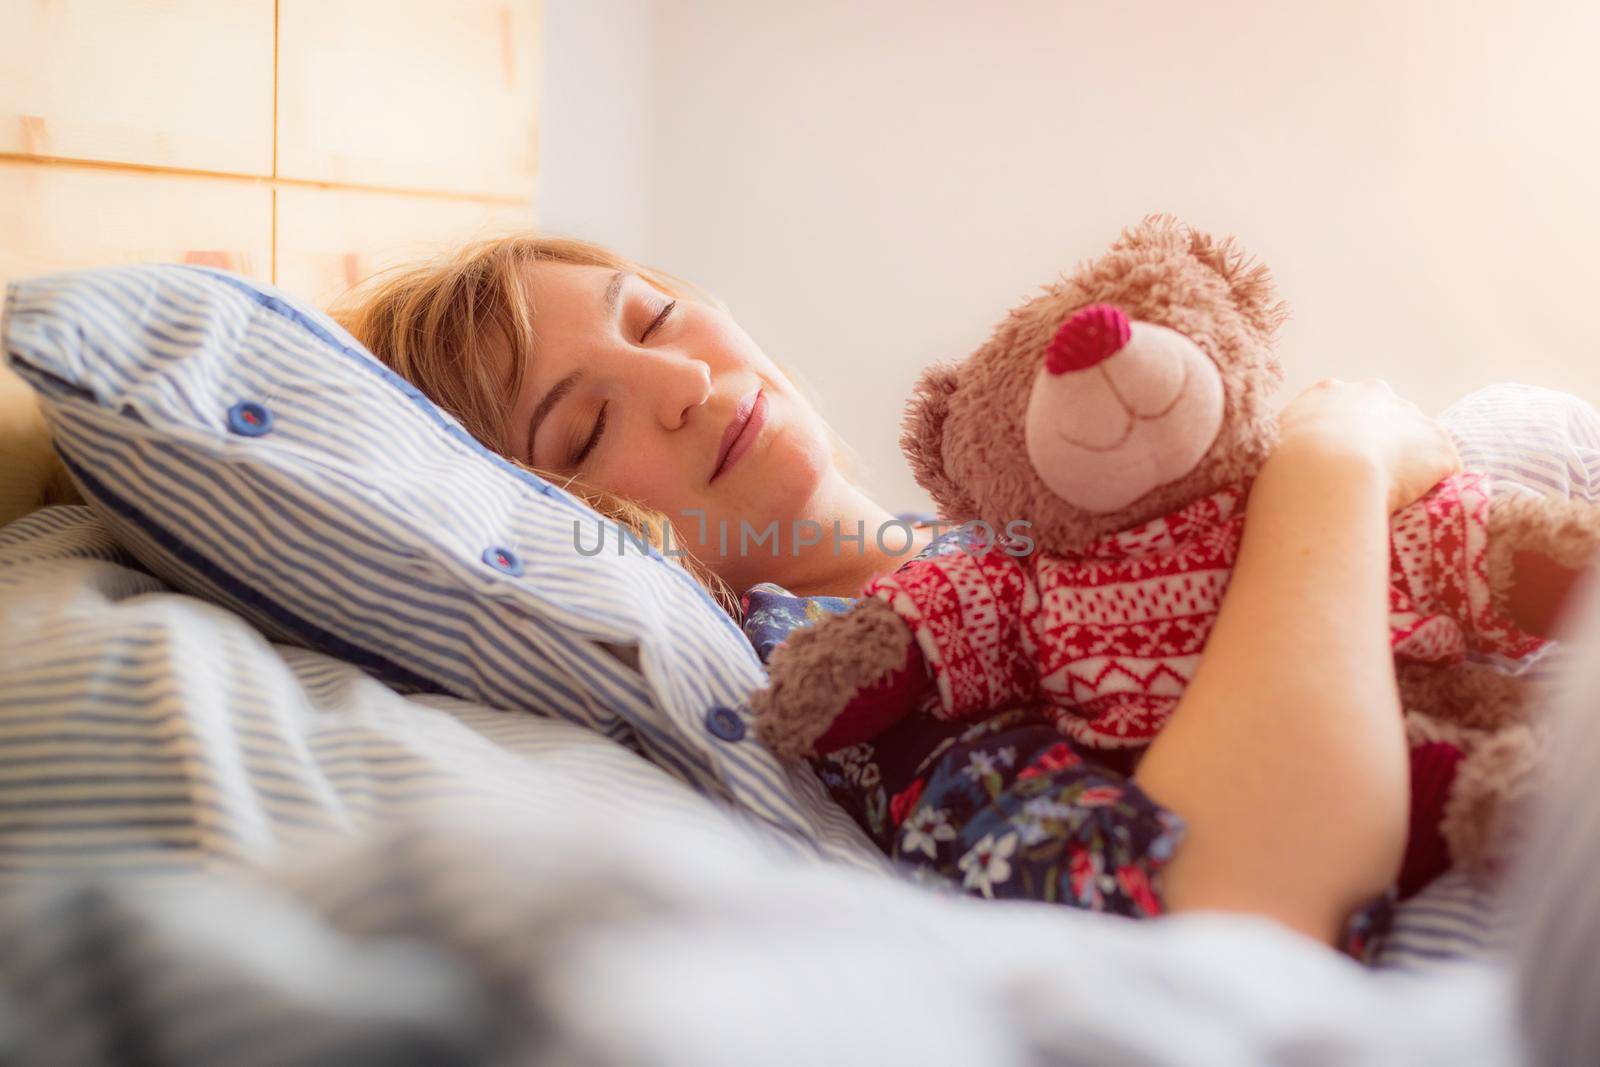 Young woman is sleeping peacefully with her teddy bear in her bedroom